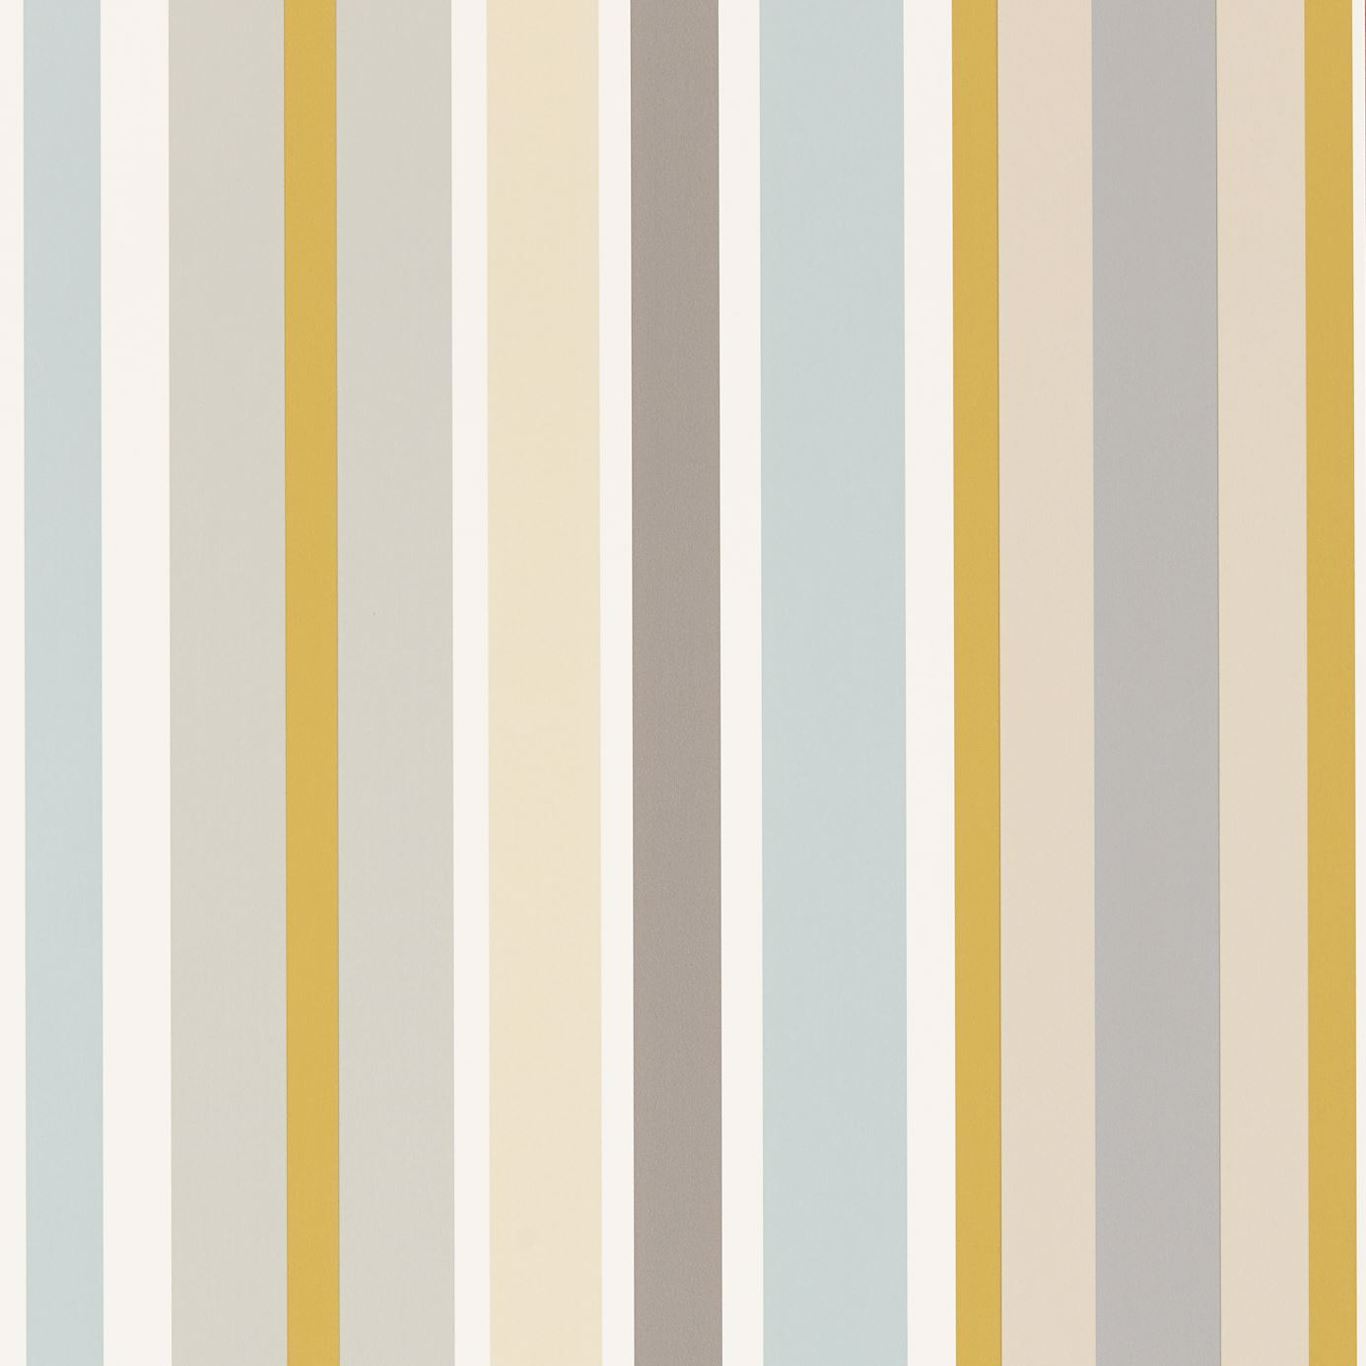 Jelly Tot Stripe Slate / Biscuit / Maize Wallpaper NSCK111262 by Scion